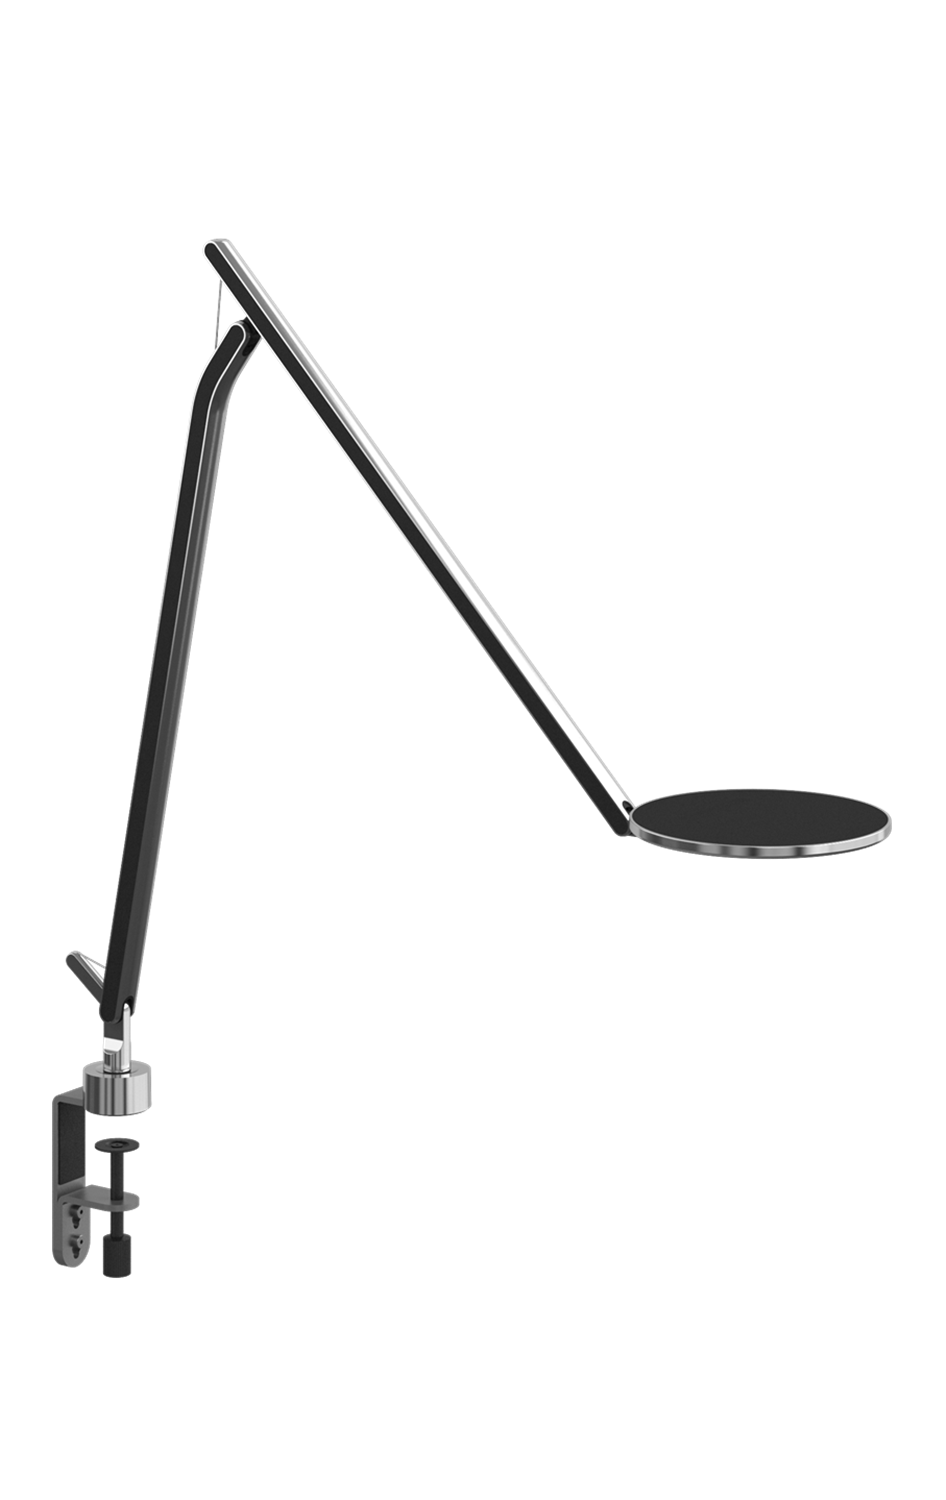 Humanscale Infinity Taks Light Black with Clamp